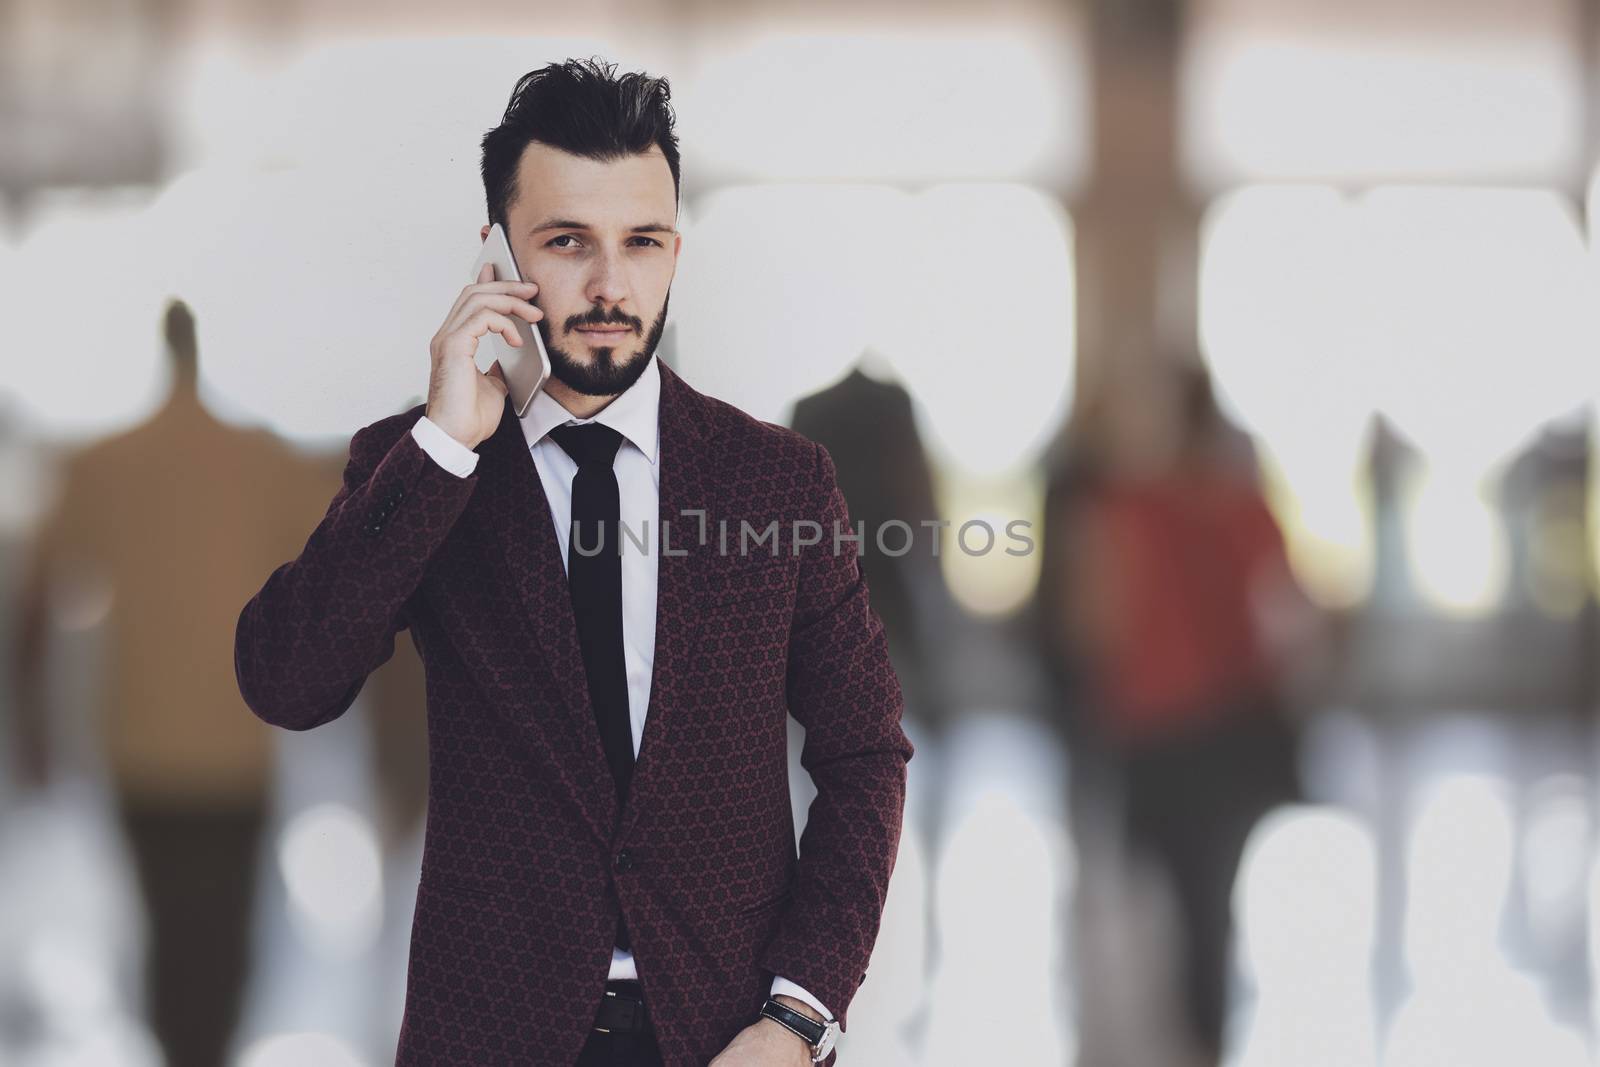 Global communication concept - businessman posing on a blured background of business people and talking on the phone.